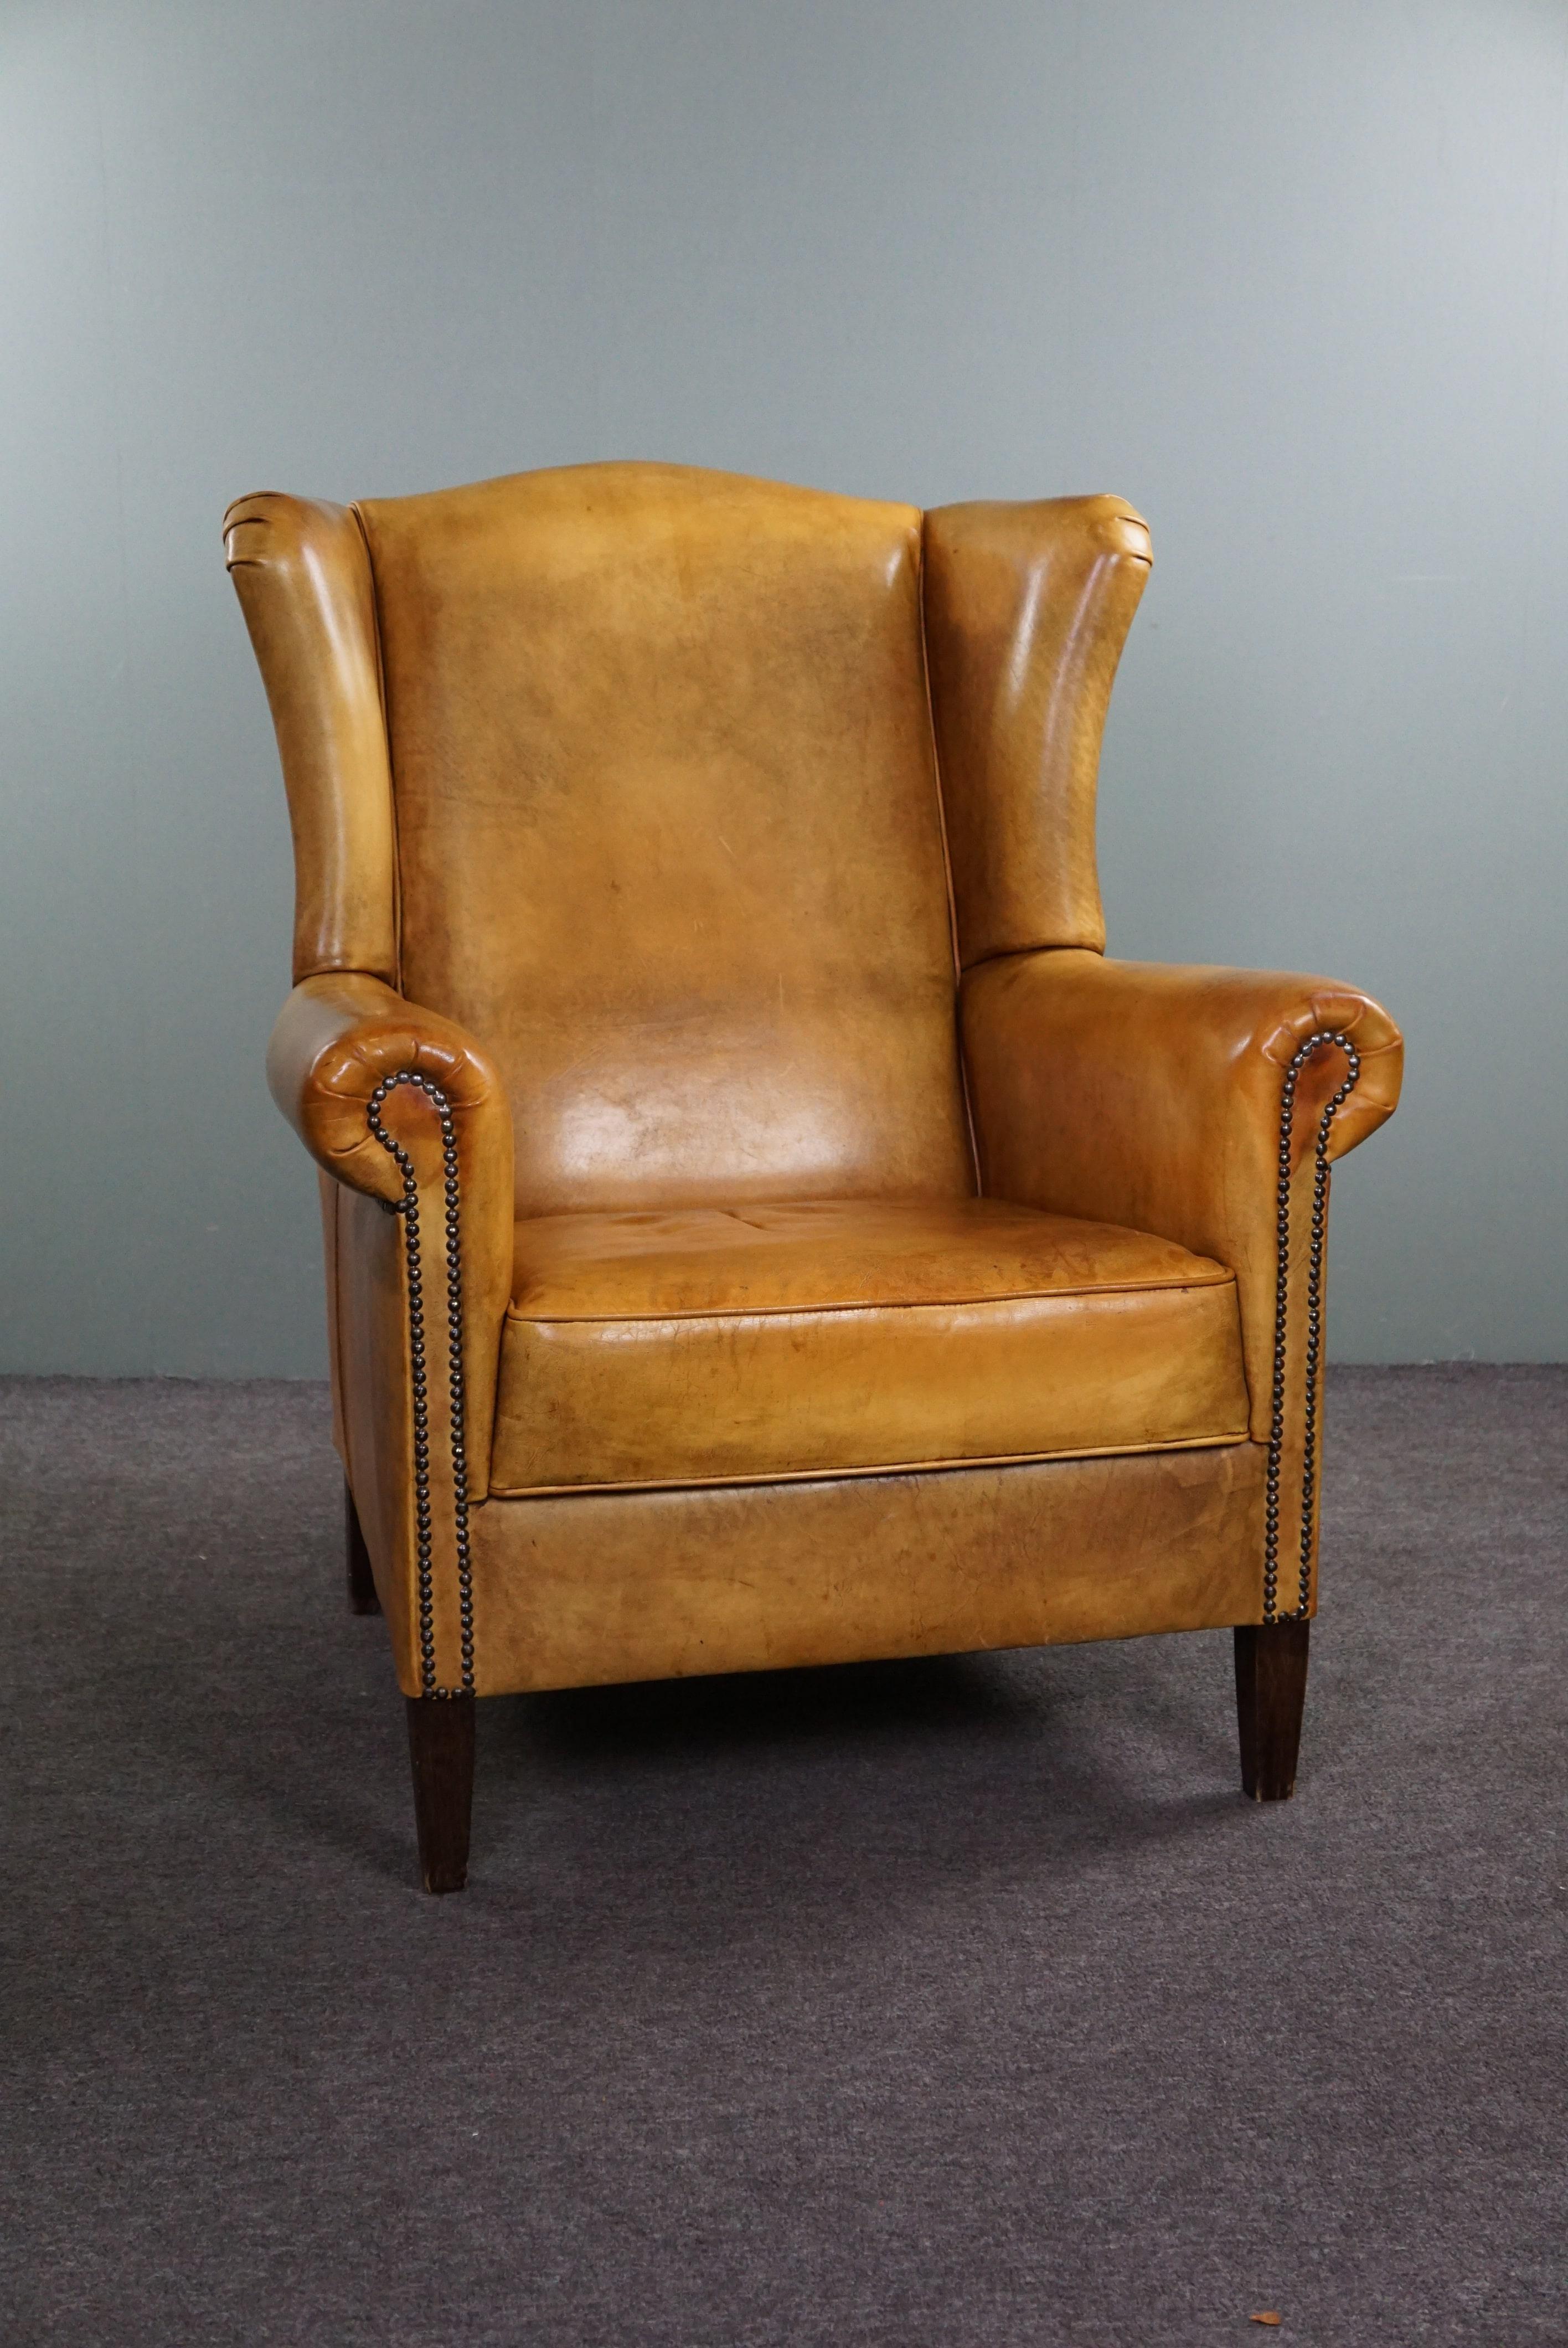 Offered is this warm-colored blonde wing chair finished with decorative nails.

This pearl has an unsurpassed expressive color and a beautiful patina. The armchair has beautiful divisions in the leather all around and is subtly finished with